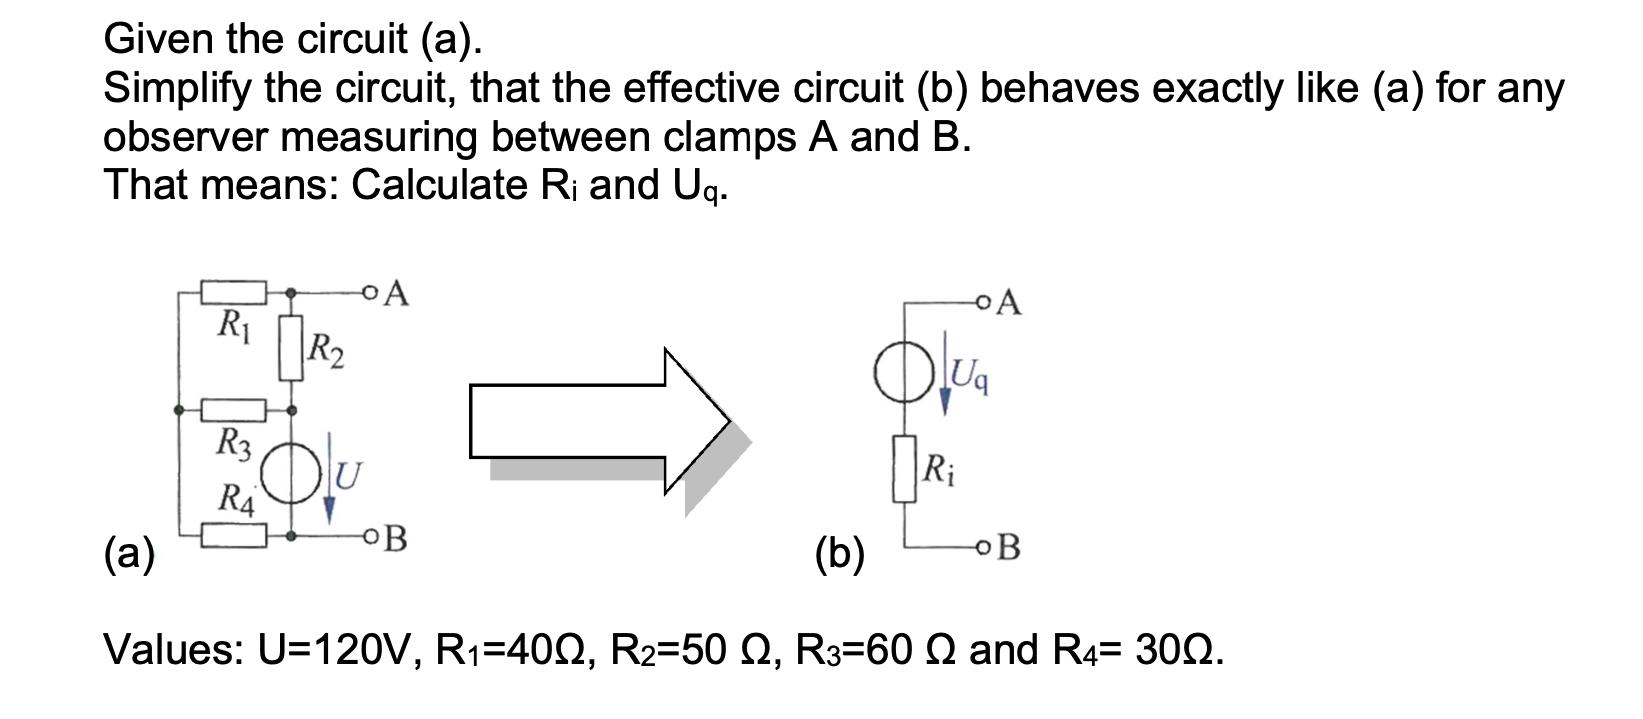 Given the circuit (a). Simplify the circuit, that the effective circuit (b) behaves exactly like (a) for any